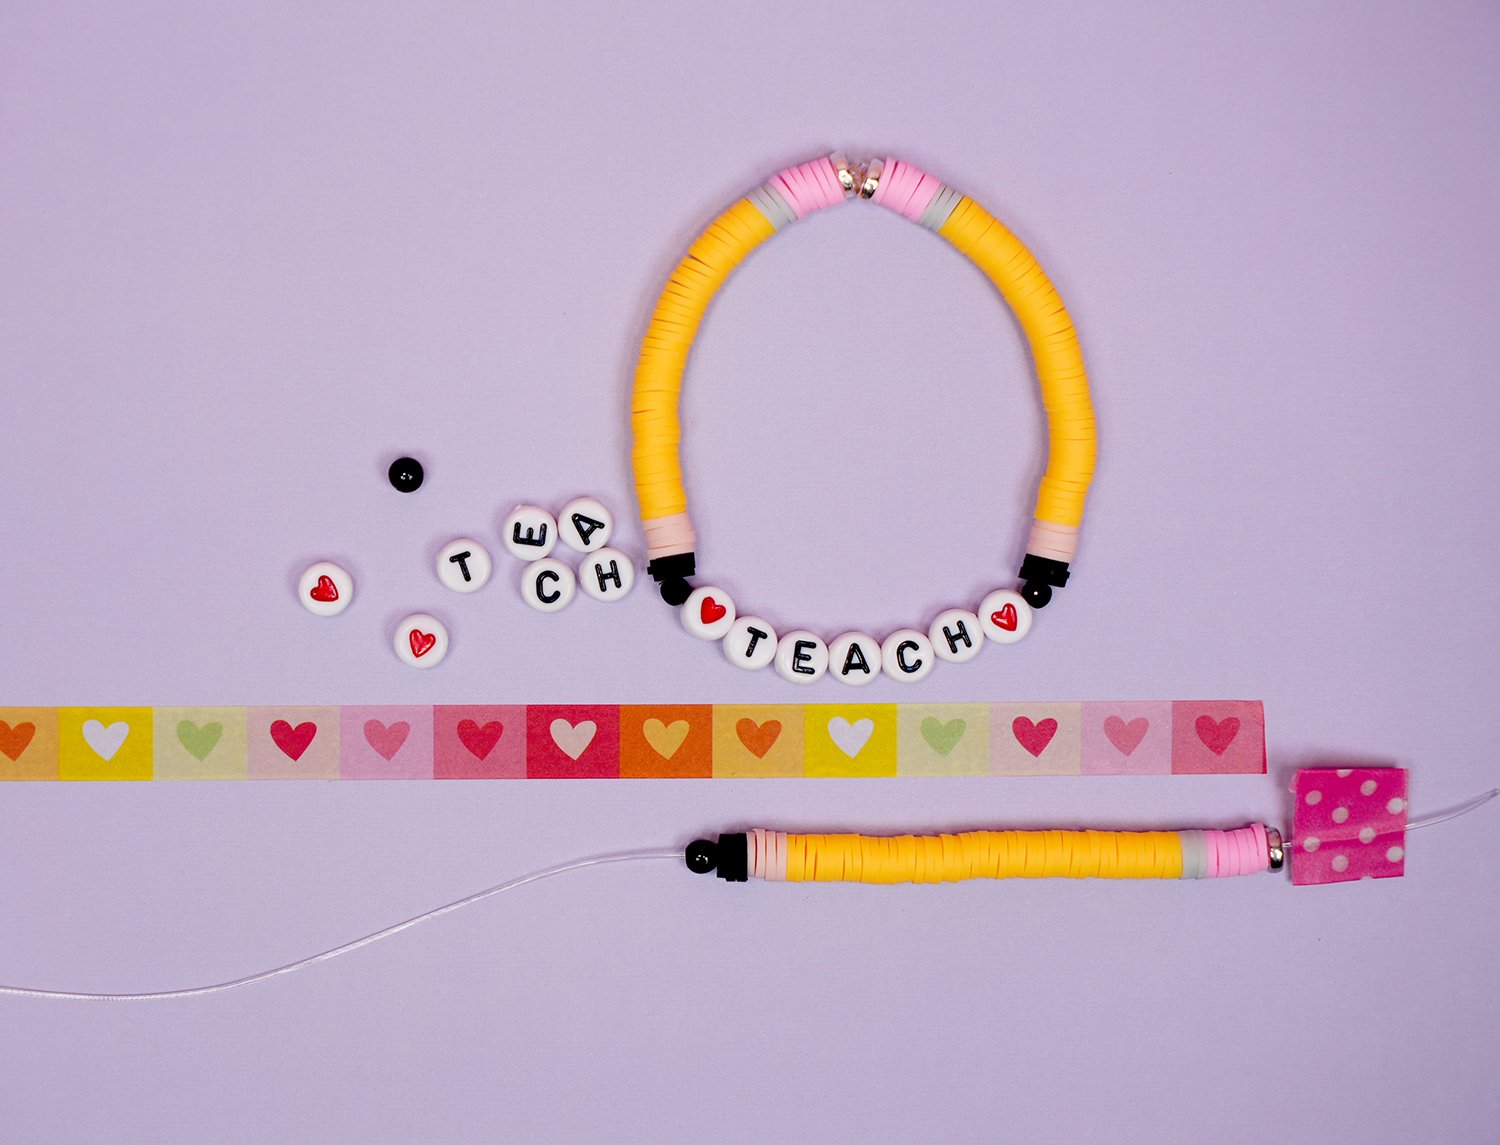 Clay bead bracelet in the making - beaded pencil on purple background with loose beads and washi tape